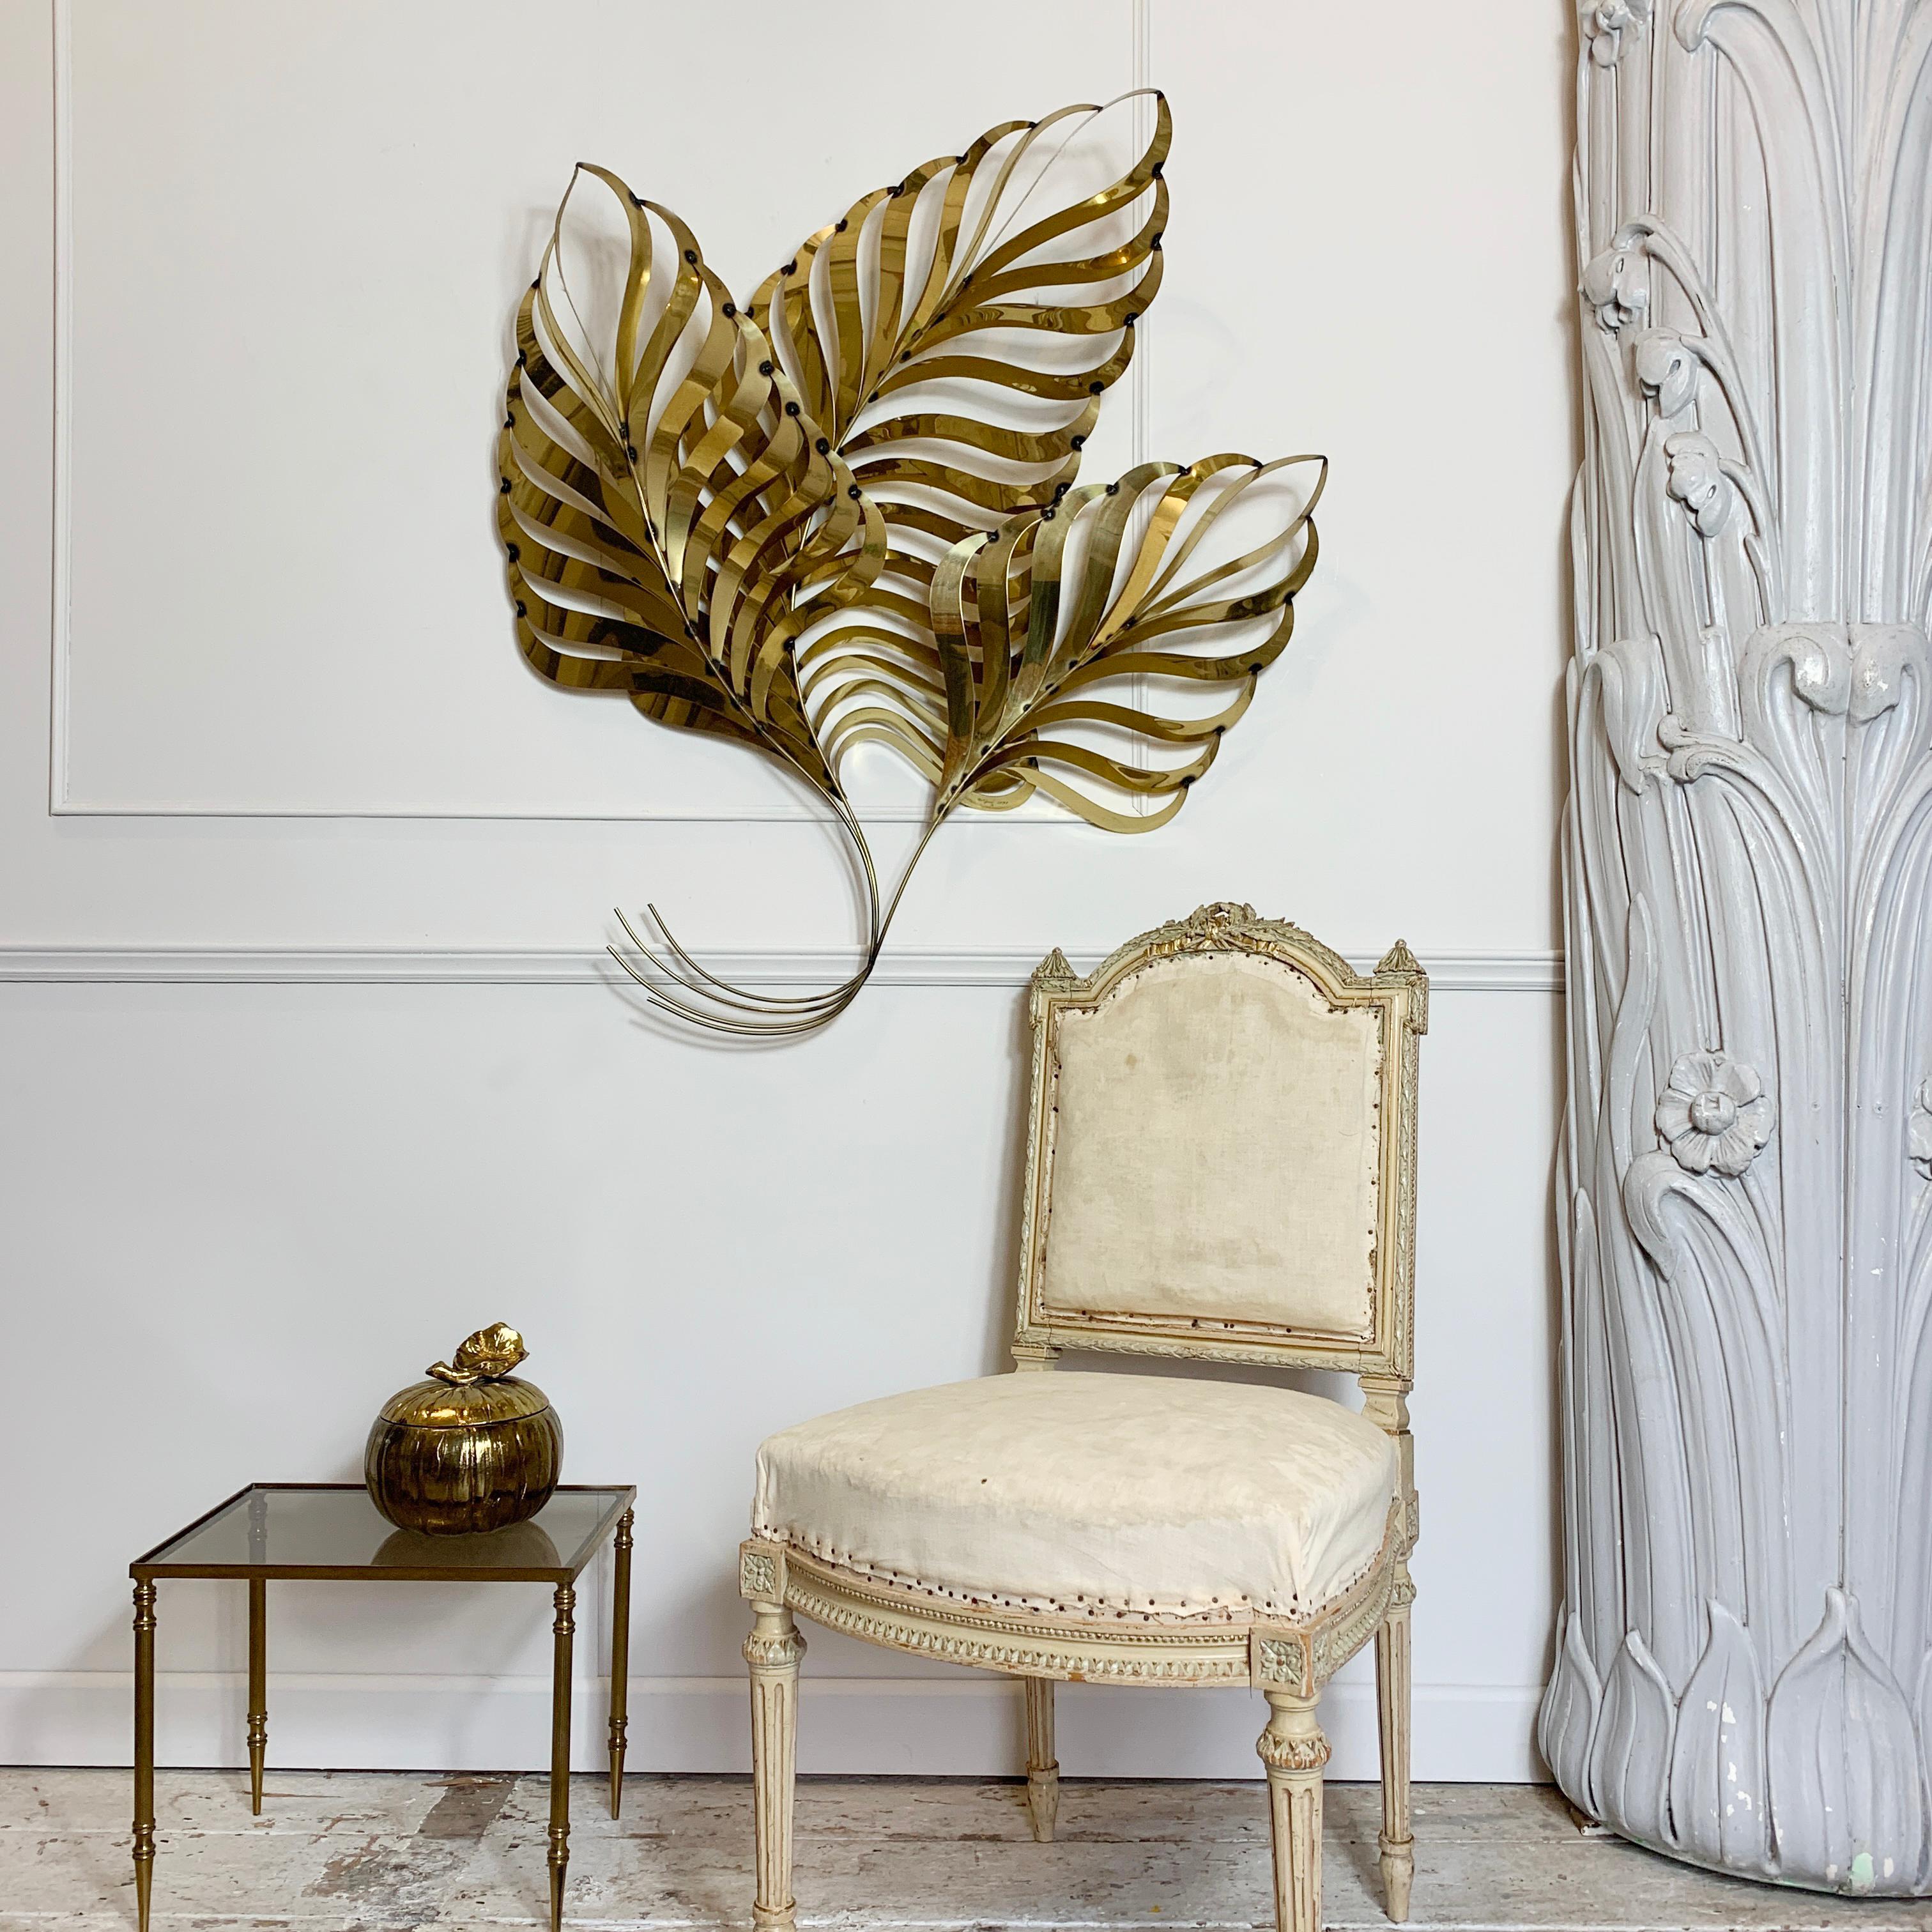 Monumental leaf wall applique, hand crafted by C Jere in their California based workshop, and fully signed C Jere 1991
The huge brass leaves are intricately cut and bonded together using small hand applied welds
Measures: 95cm height, 87cm width,